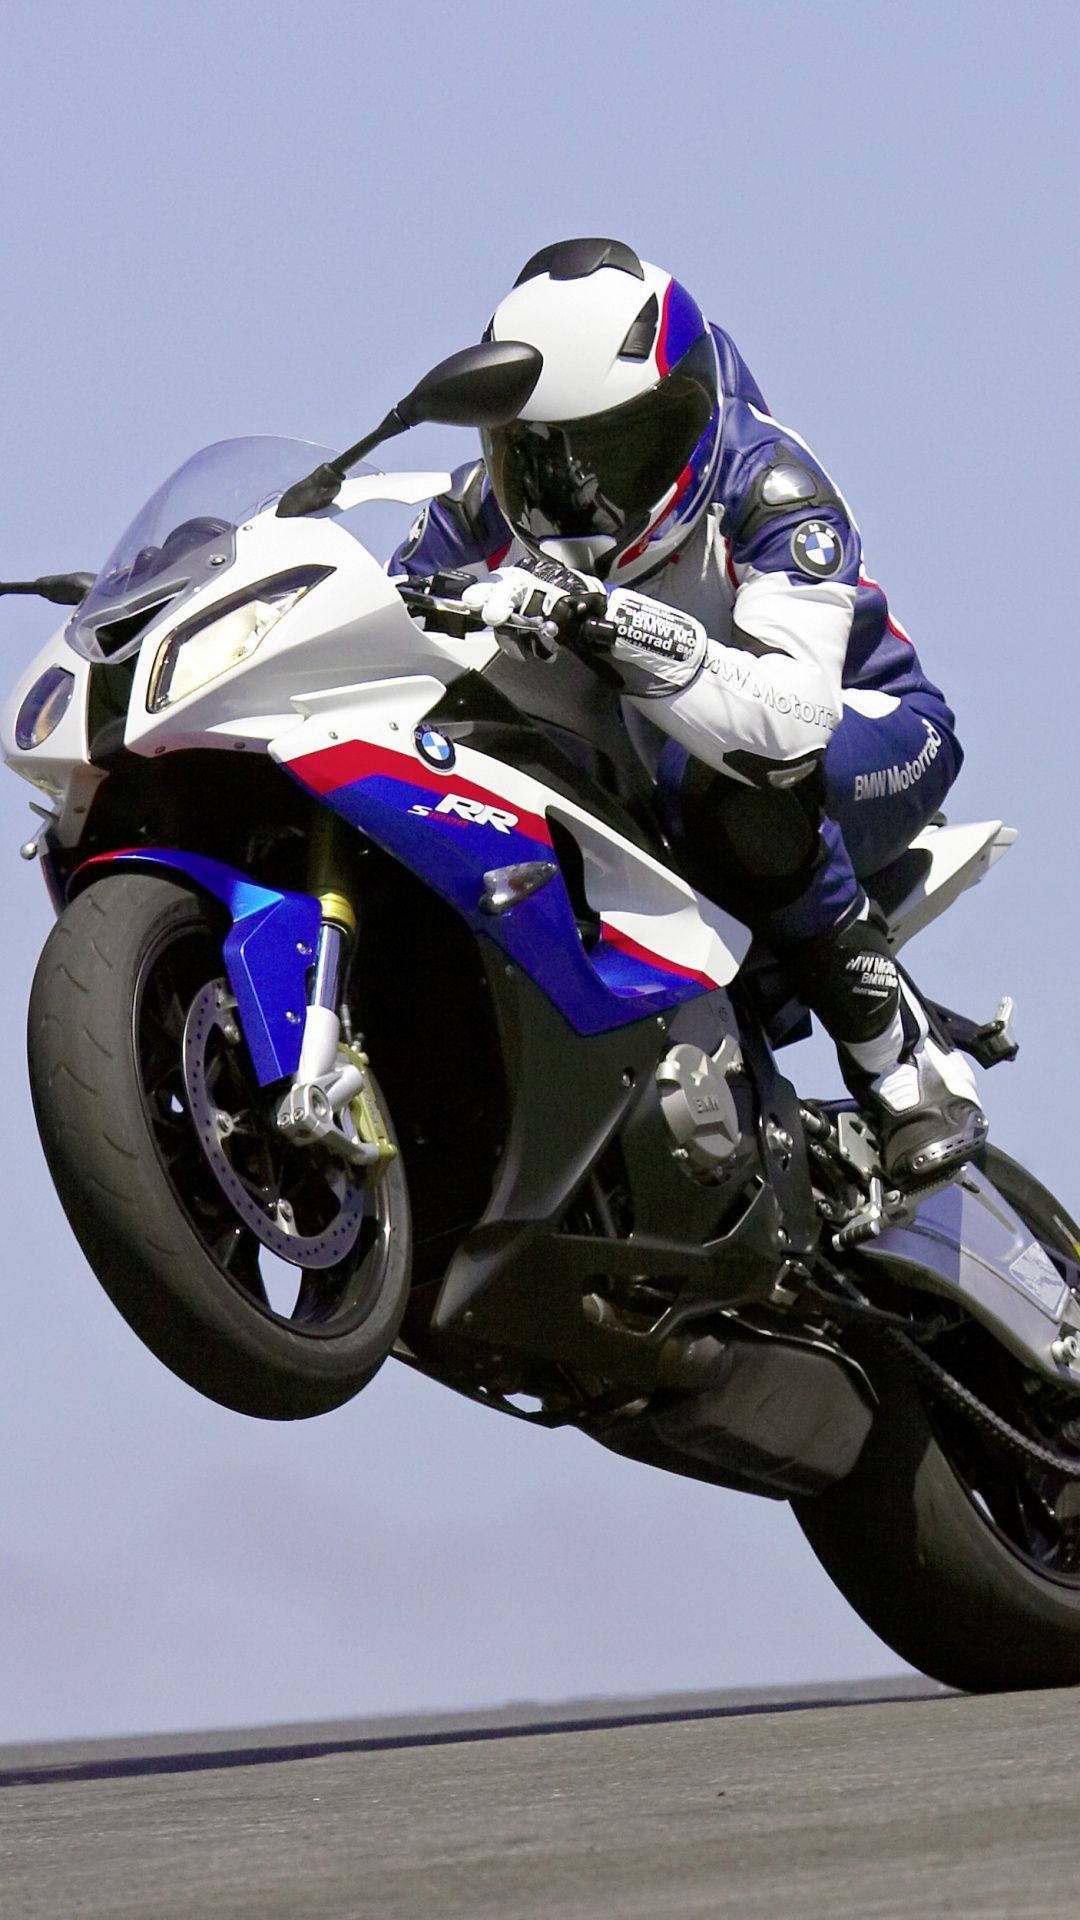 Wallpaper race track, motorcycling, bmw s1000rr, racing